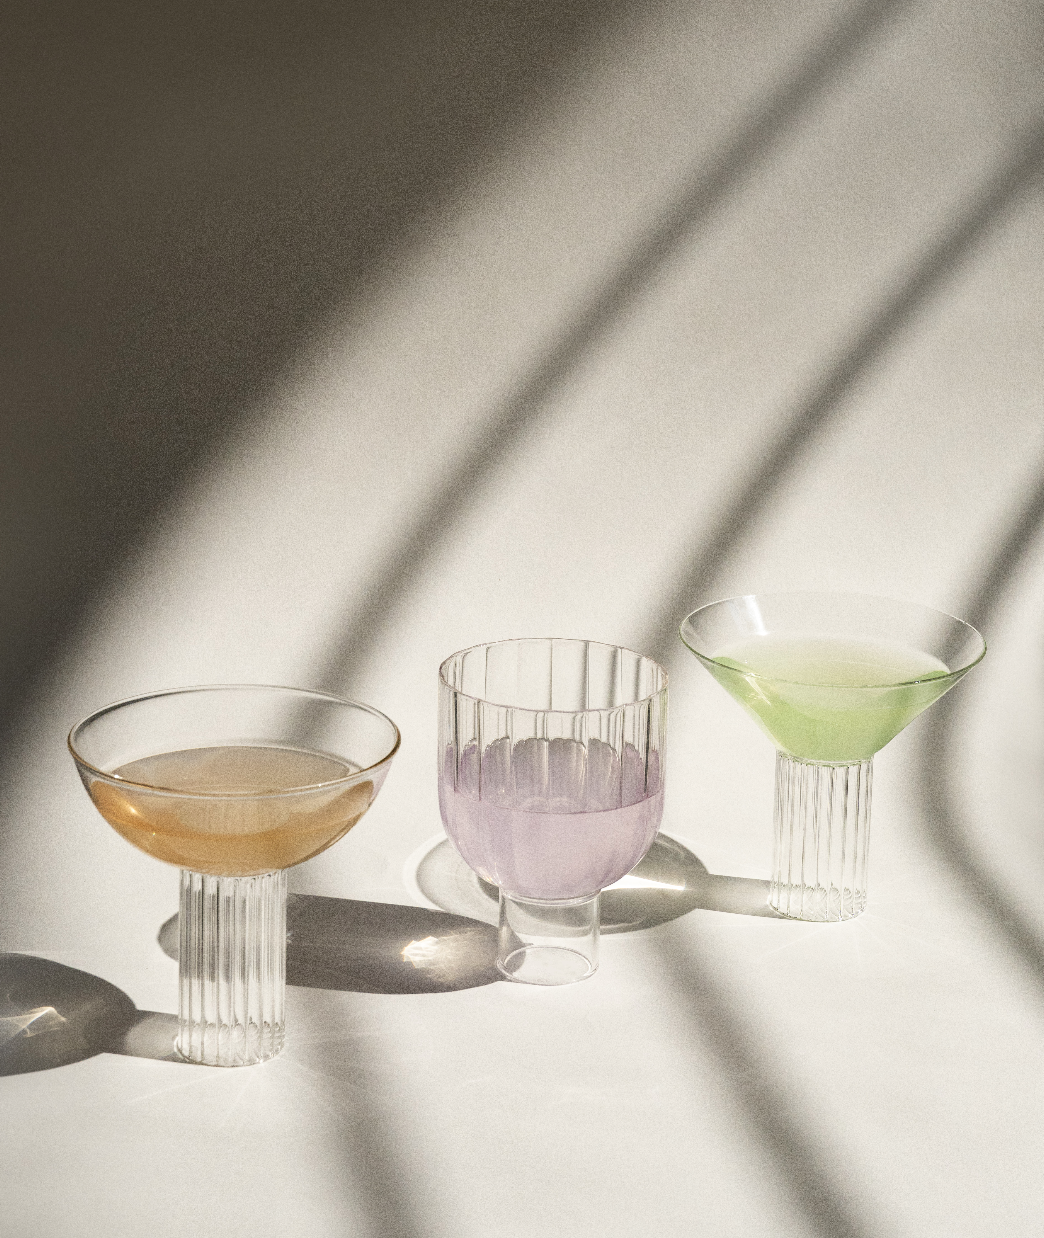 Three elegant Calici Milanesi cocktail glasses, forming a glassware trio with different colored drinks, illuminated by sunlight casting long shadows on a textured surface. (Agustina Bottoni)